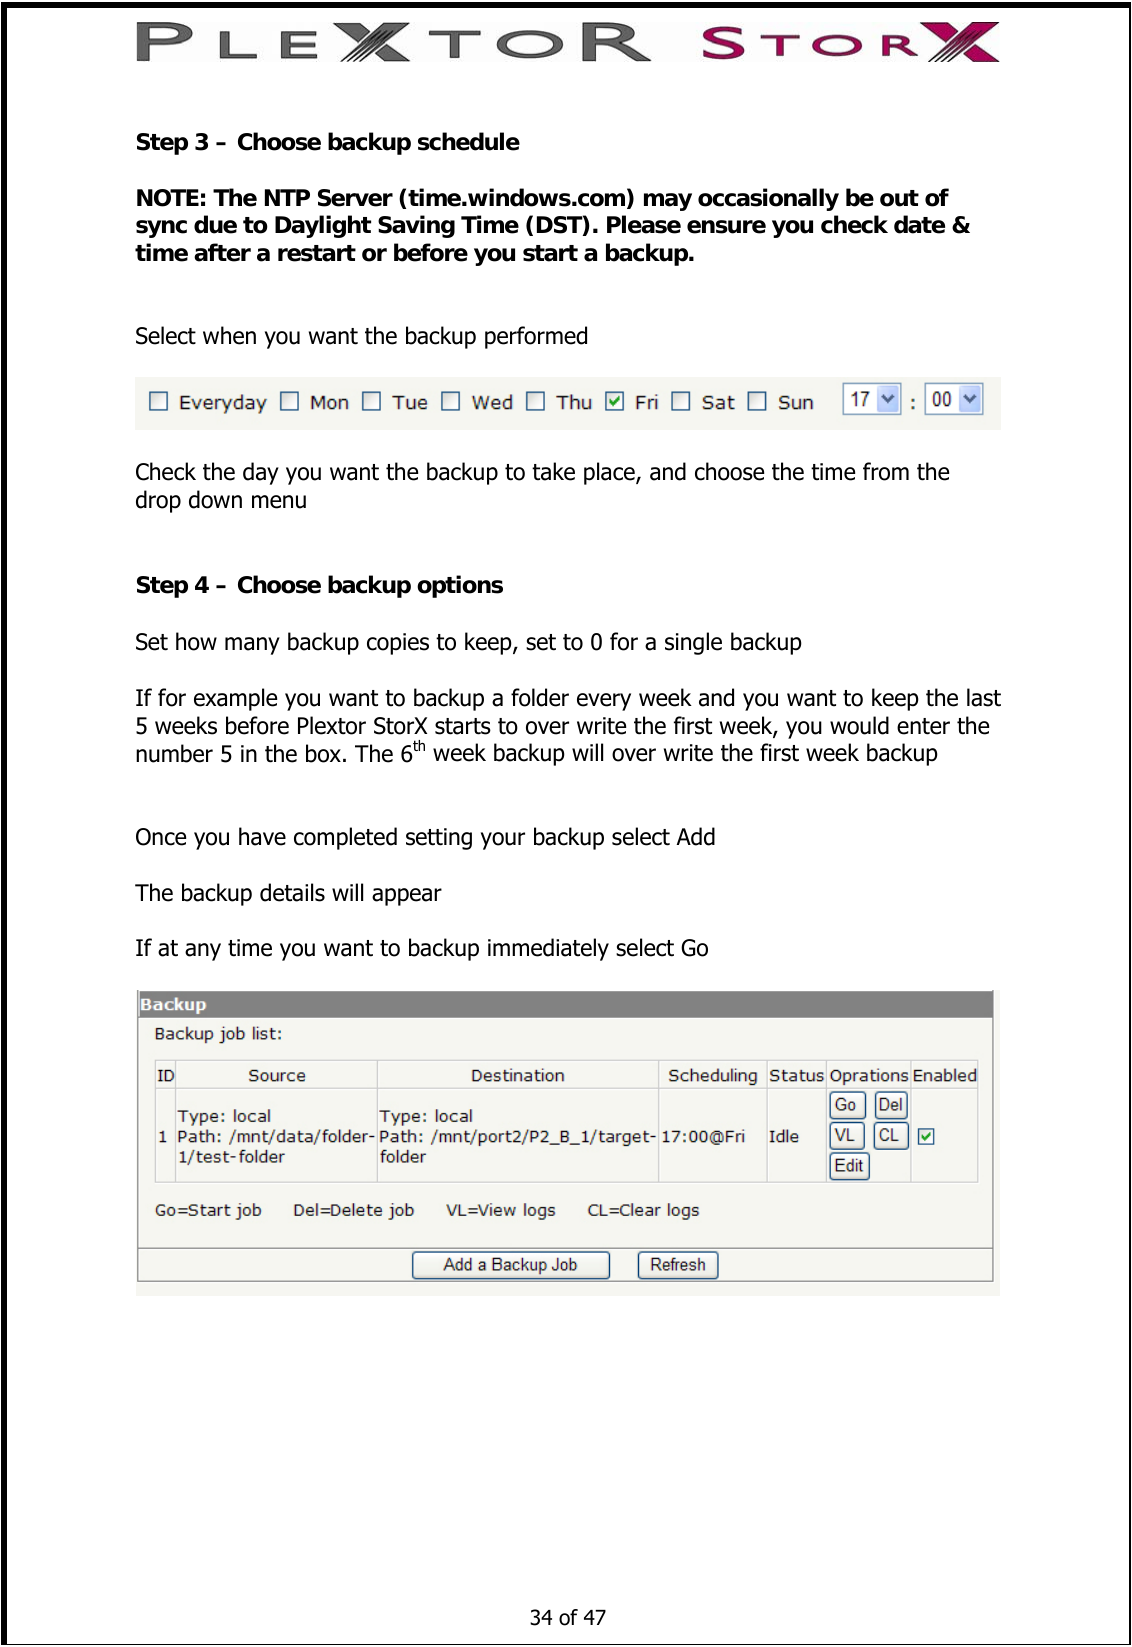   Step 3 – Choose backup schedule  NOTE: The NTP Server (time.windows.com) may occasionally be out of sync due to Daylight Saving Time (DST). Please ensure you check date &amp; time after a restart or before you start a backup.   Select when you want the backup performed    Check the day you want the backup to take place, and choose the time from the drop down menu   Step 4 – Choose backup options  Set how many backup copies to keep, set to 0 for a single backup  If for example you want to backup a folder every week and you want to keep the last 5 weeks before Plextor StorX starts to over write the first week, you would enter the number 5 in the box. The 6th week backup will over write the first week backup   Once you have completed setting your backup select Add  The backup details will appear  If at any time you want to backup immediately select Go     34 of 47    